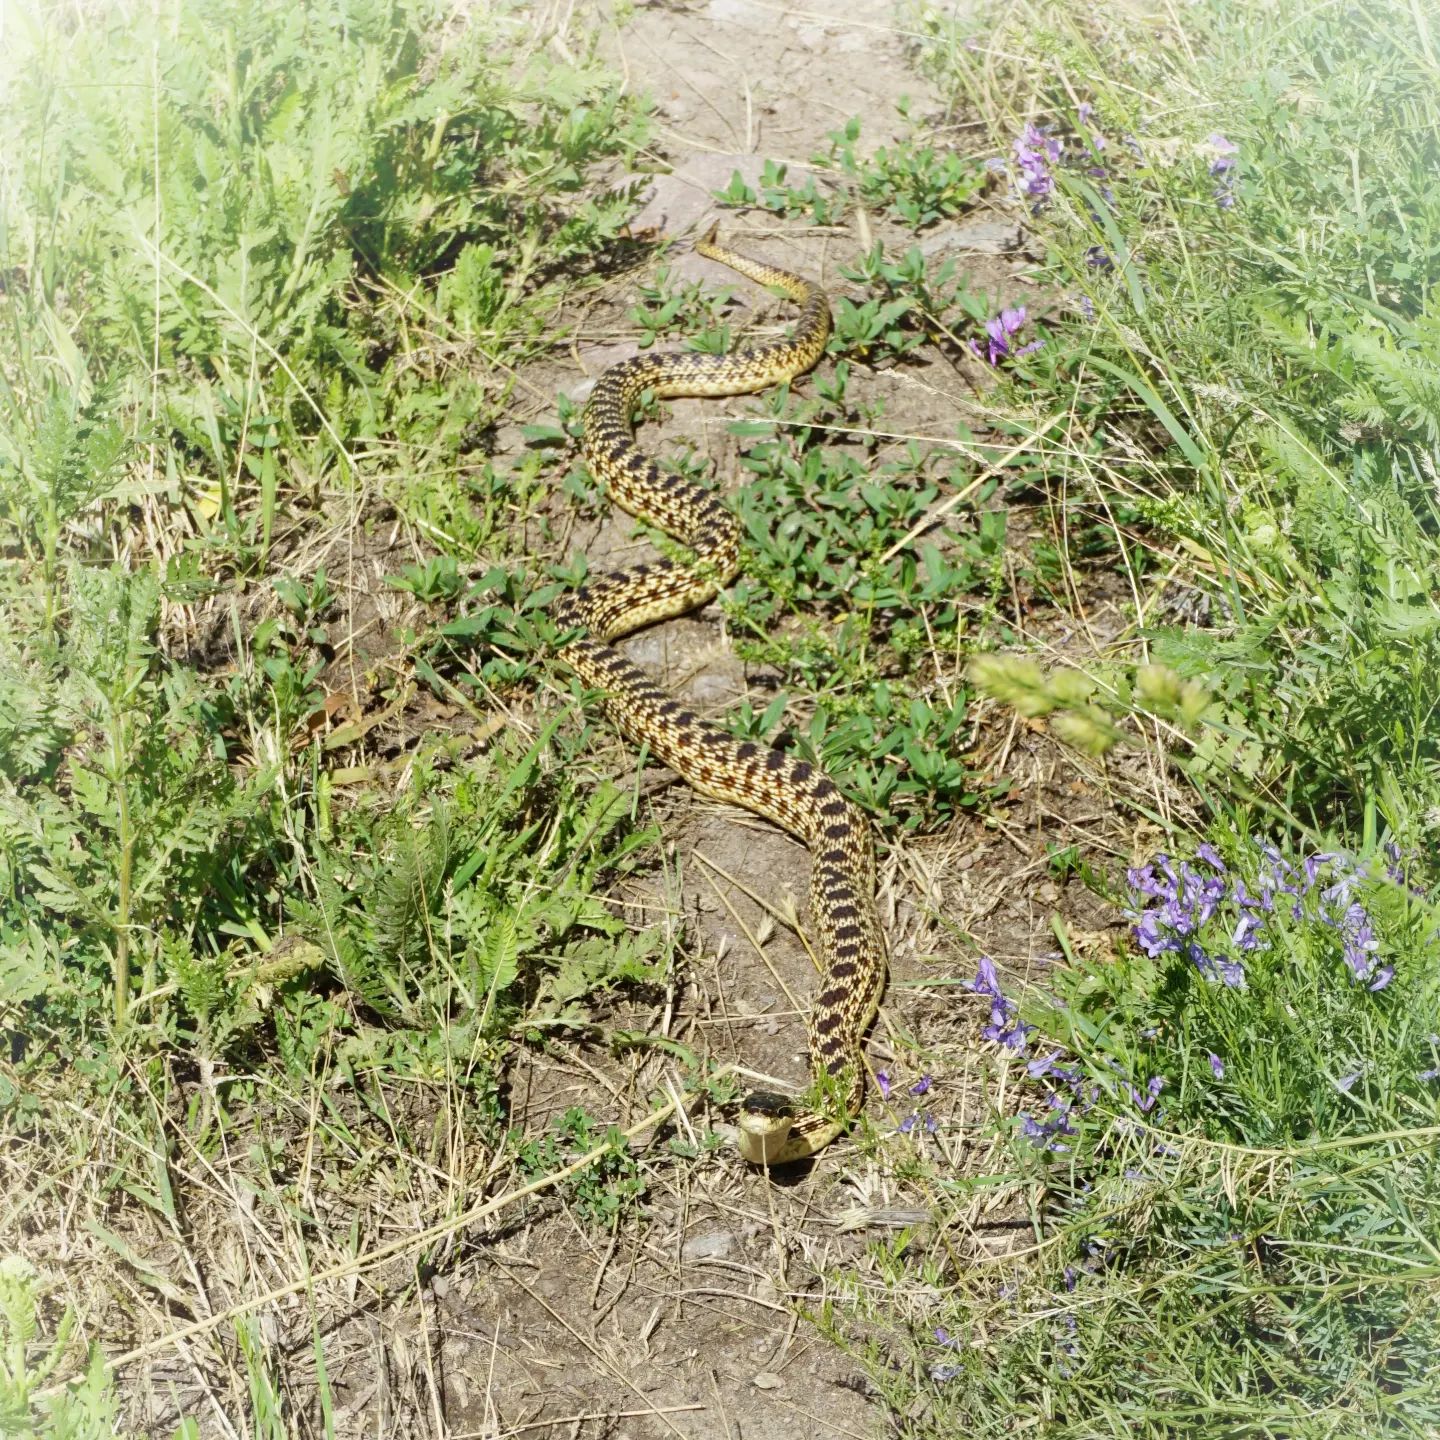 A photograph of a large yellow and black snake slithering towards the camera along a path, with its head slightly raised.